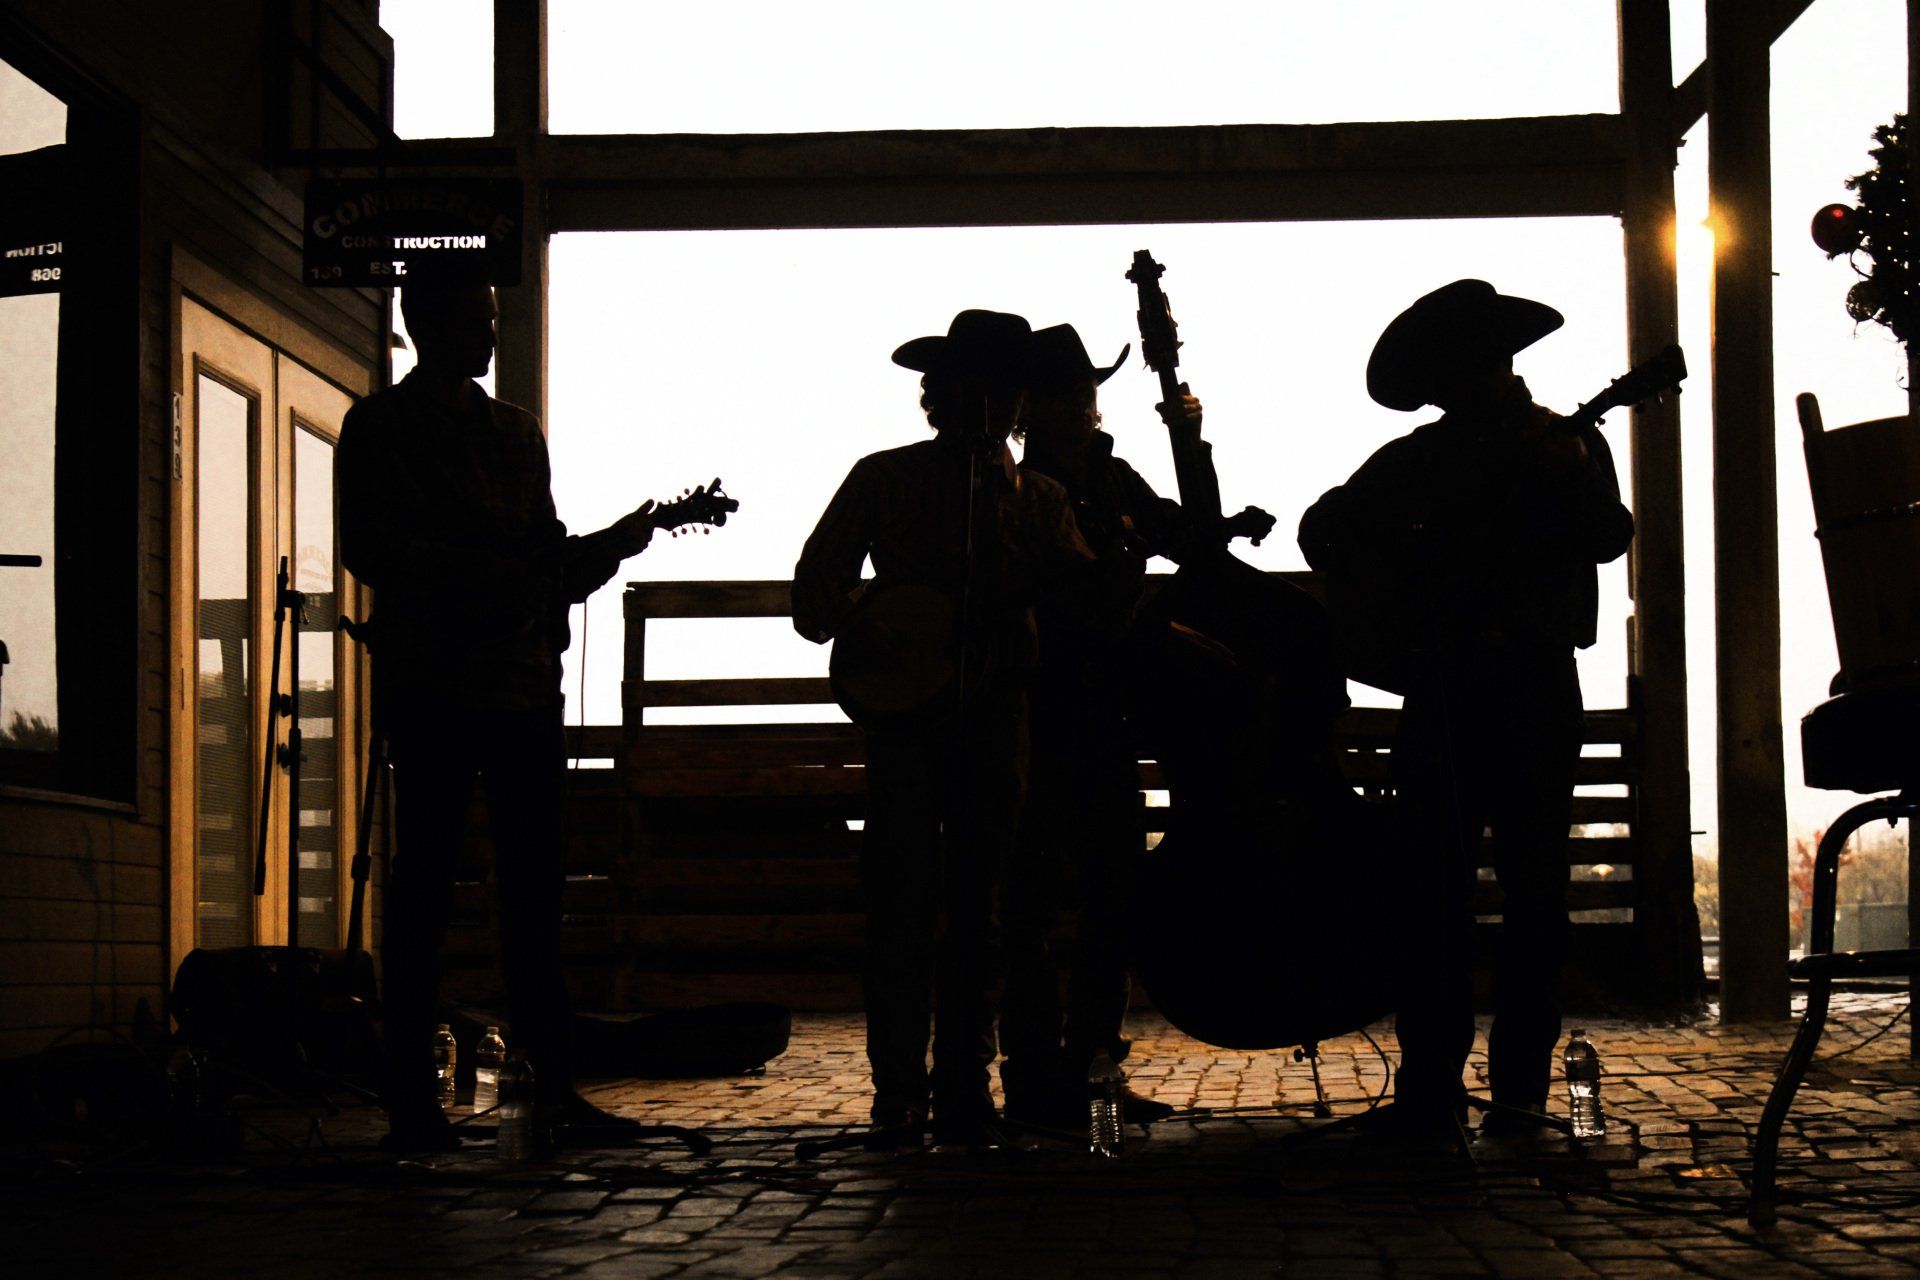 A group of people are playing instruments on a porch.